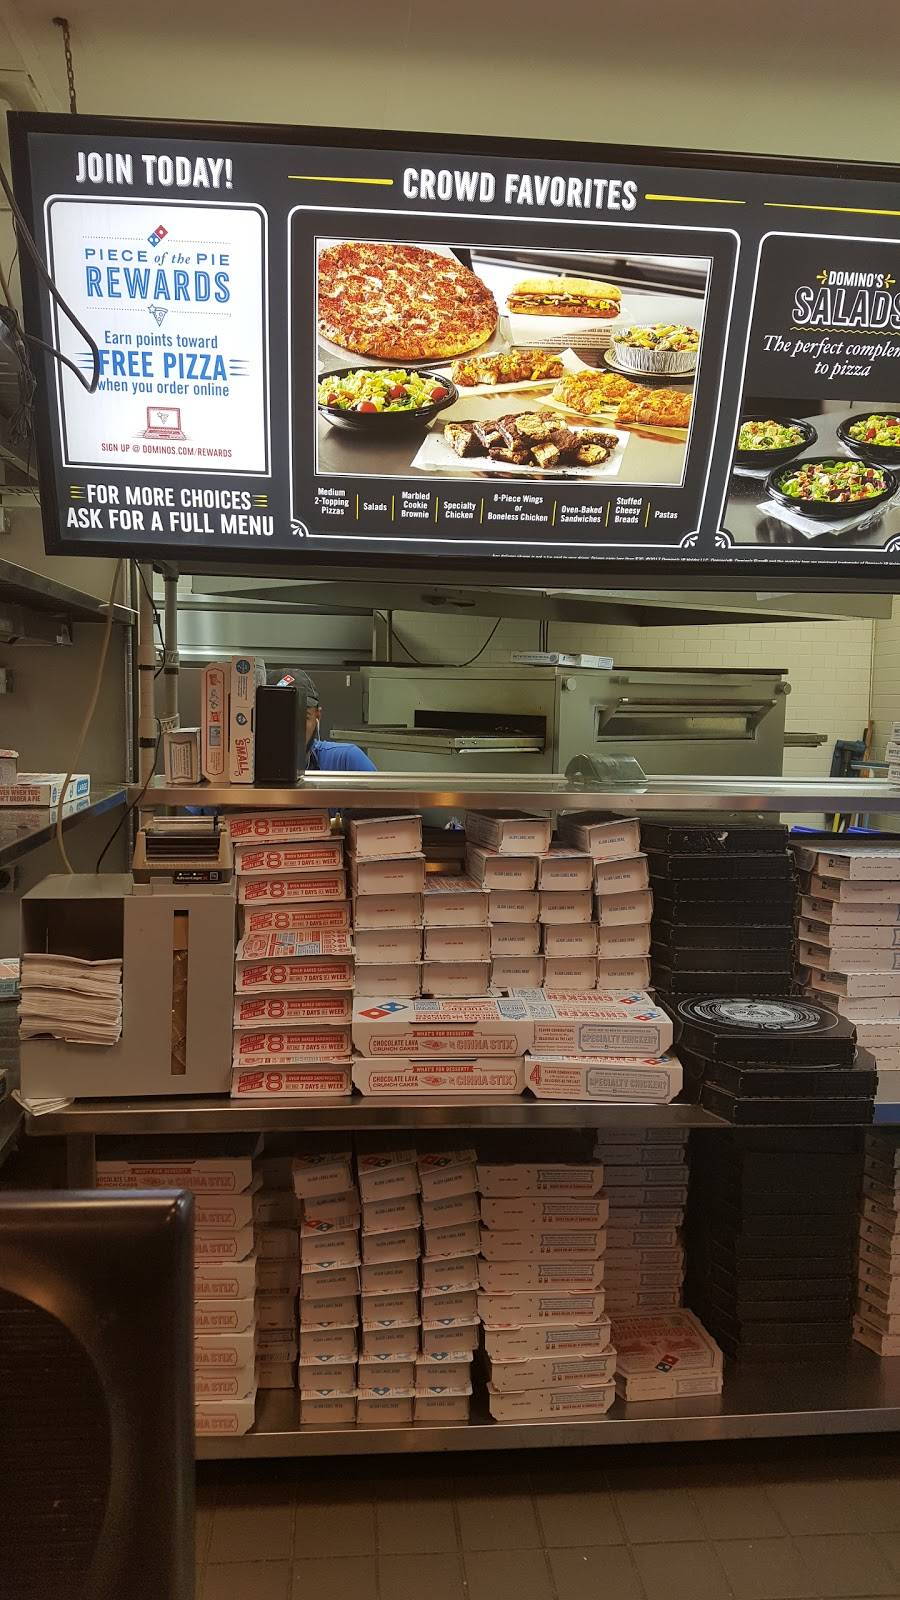 Dominos Pizza | meal delivery | 1051 Broadway, Bayonne, NJ 07002, USA | 2013393030 OR +1 201-339-3030